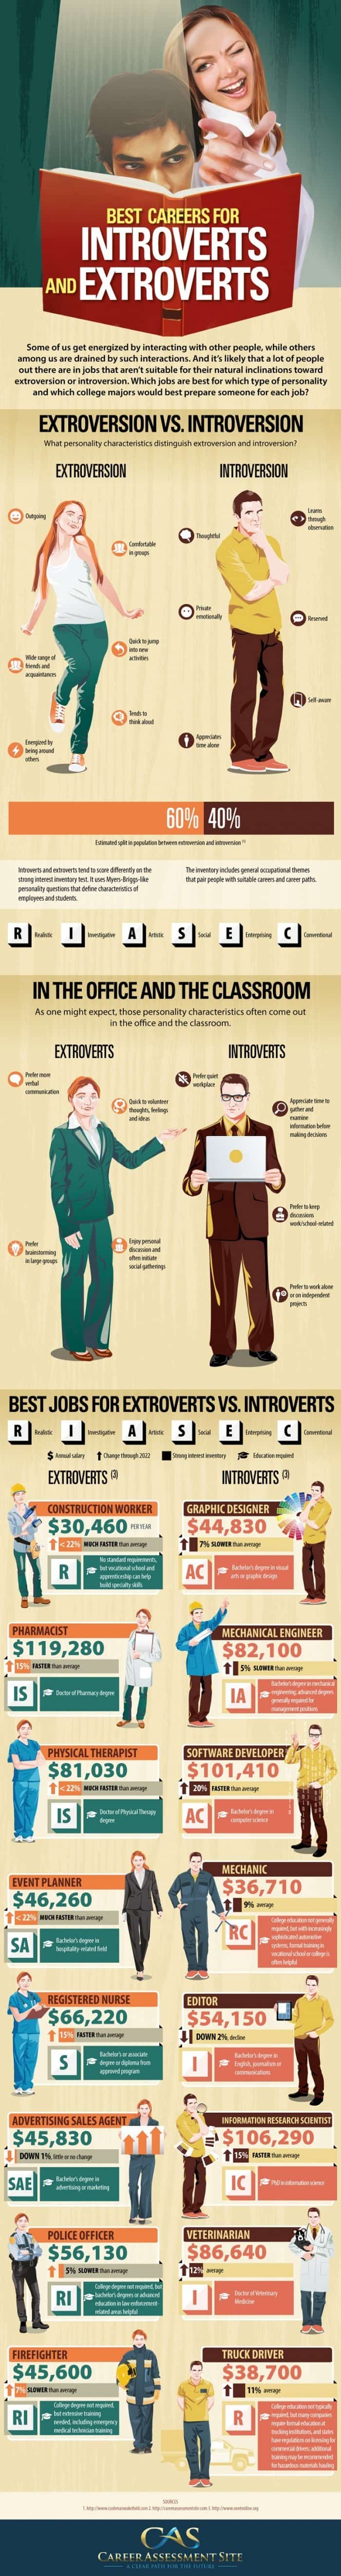 The Best Careers For Introverts And Extroverts [Infographic] | Daily Infographic